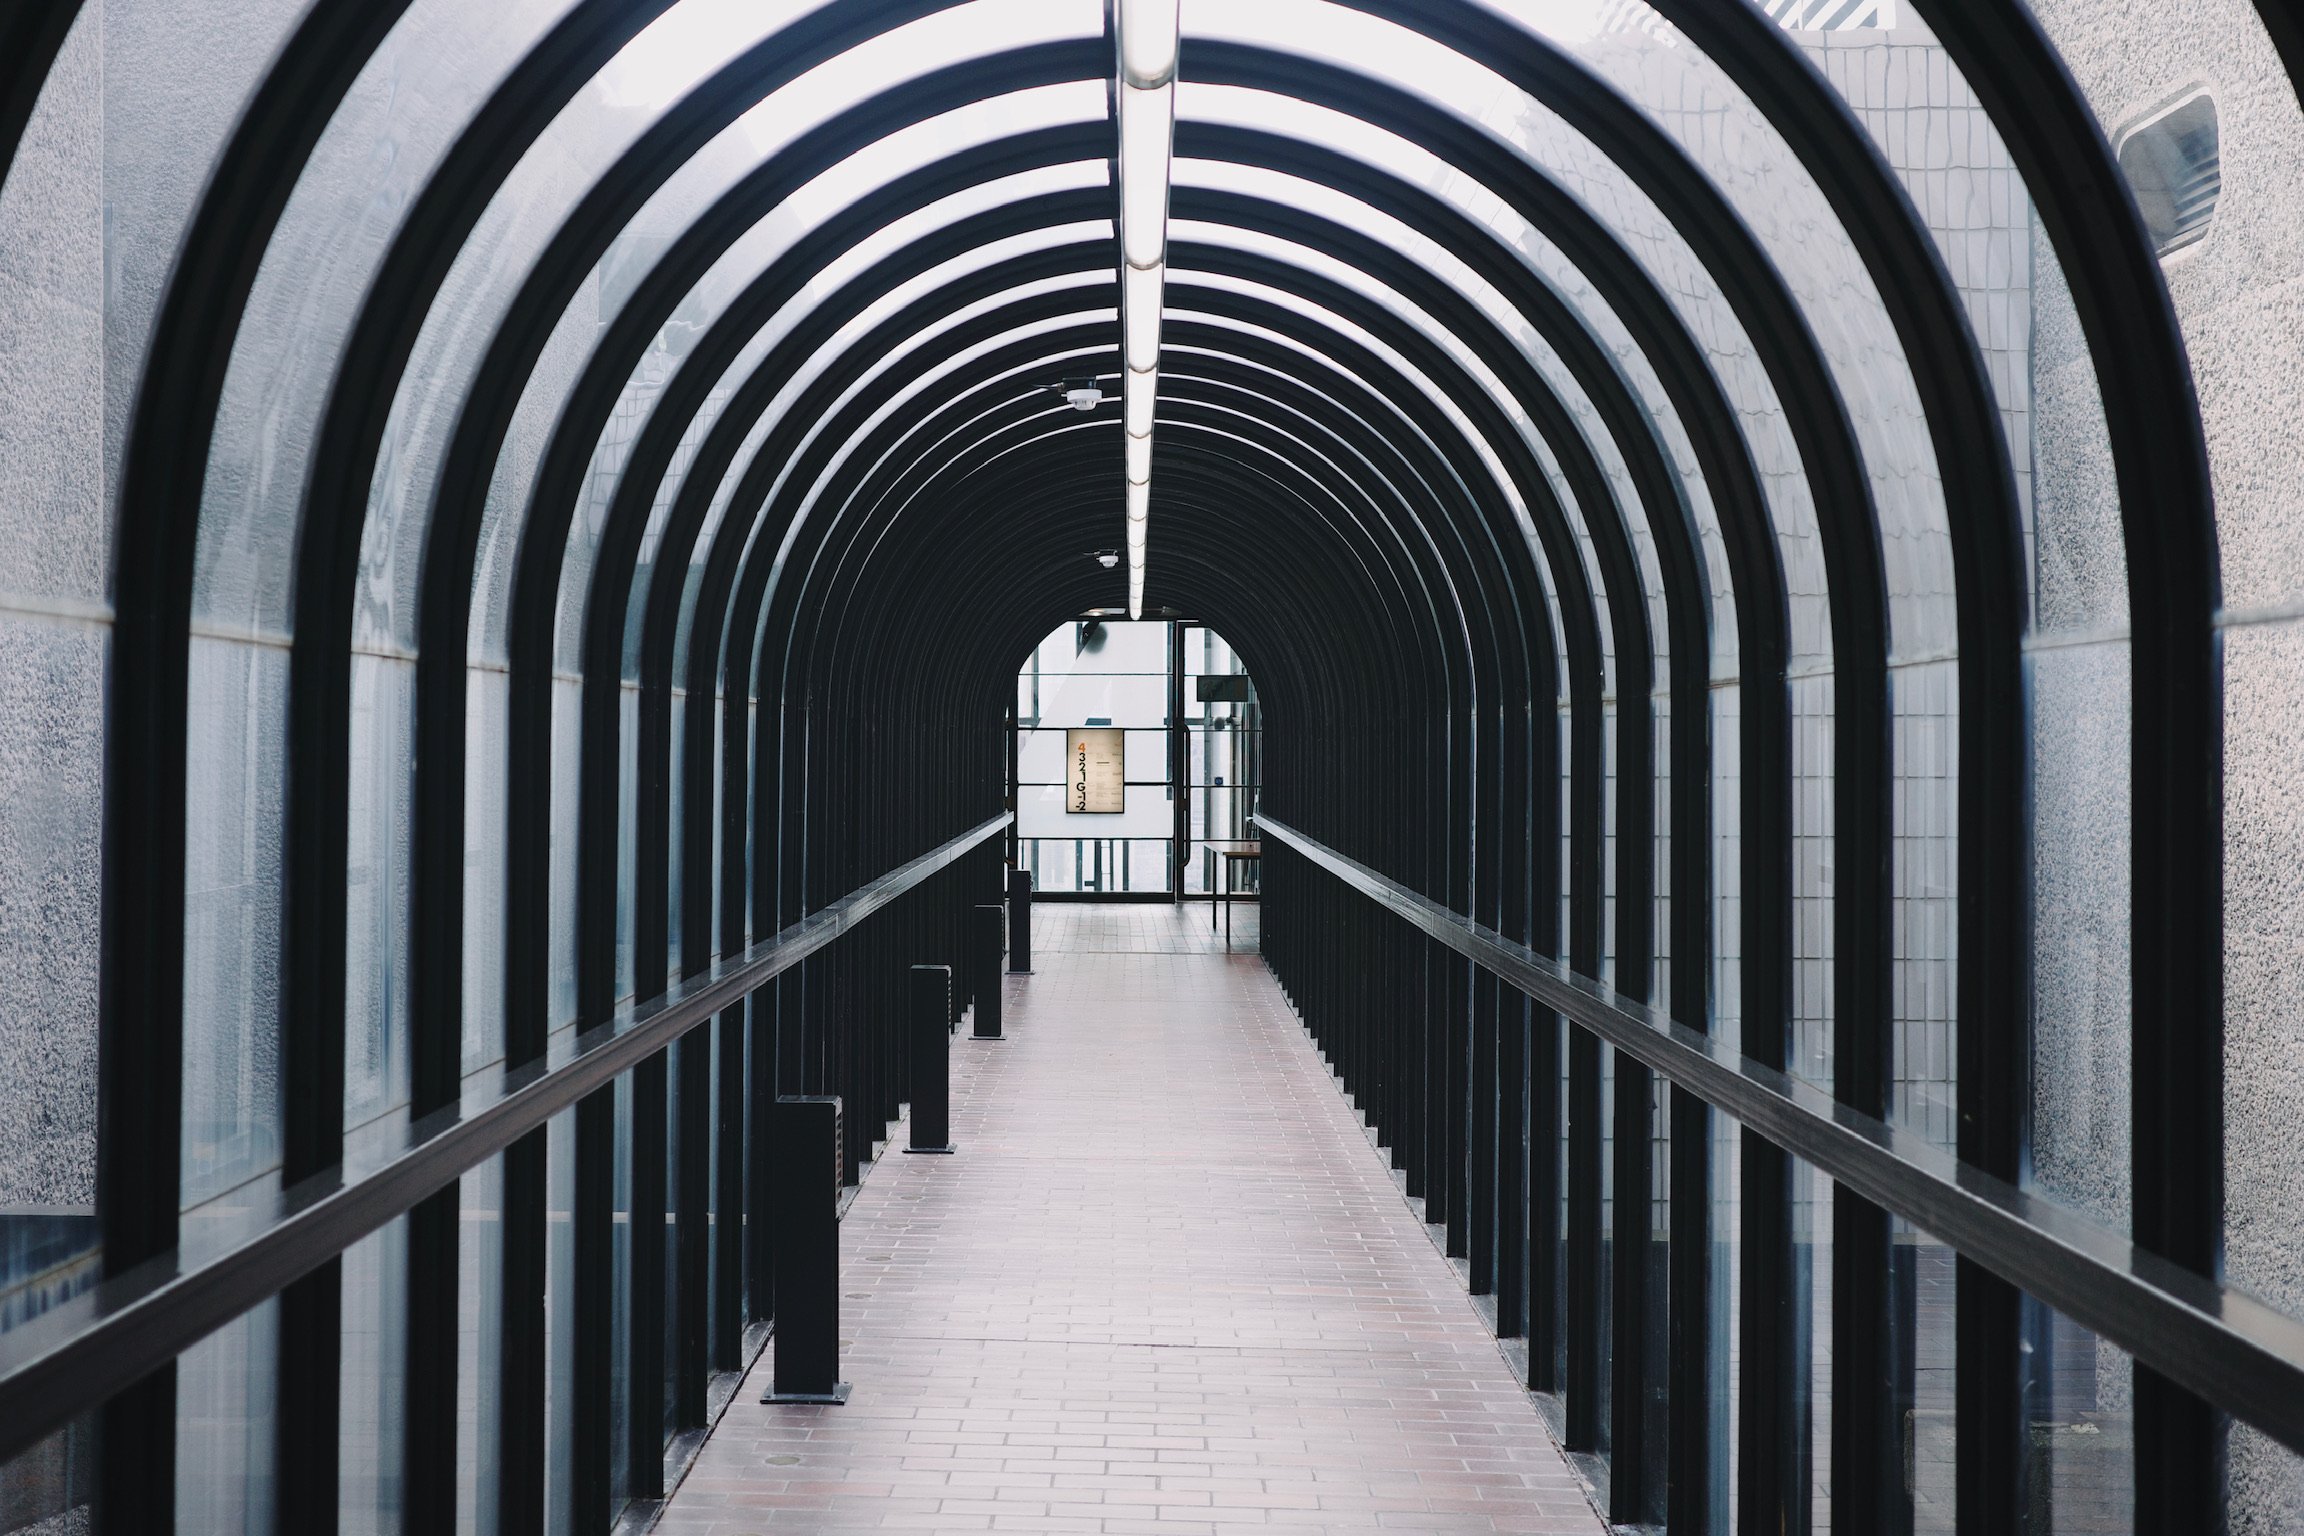 An archway connecting buildings with glass panels and black metal structure.